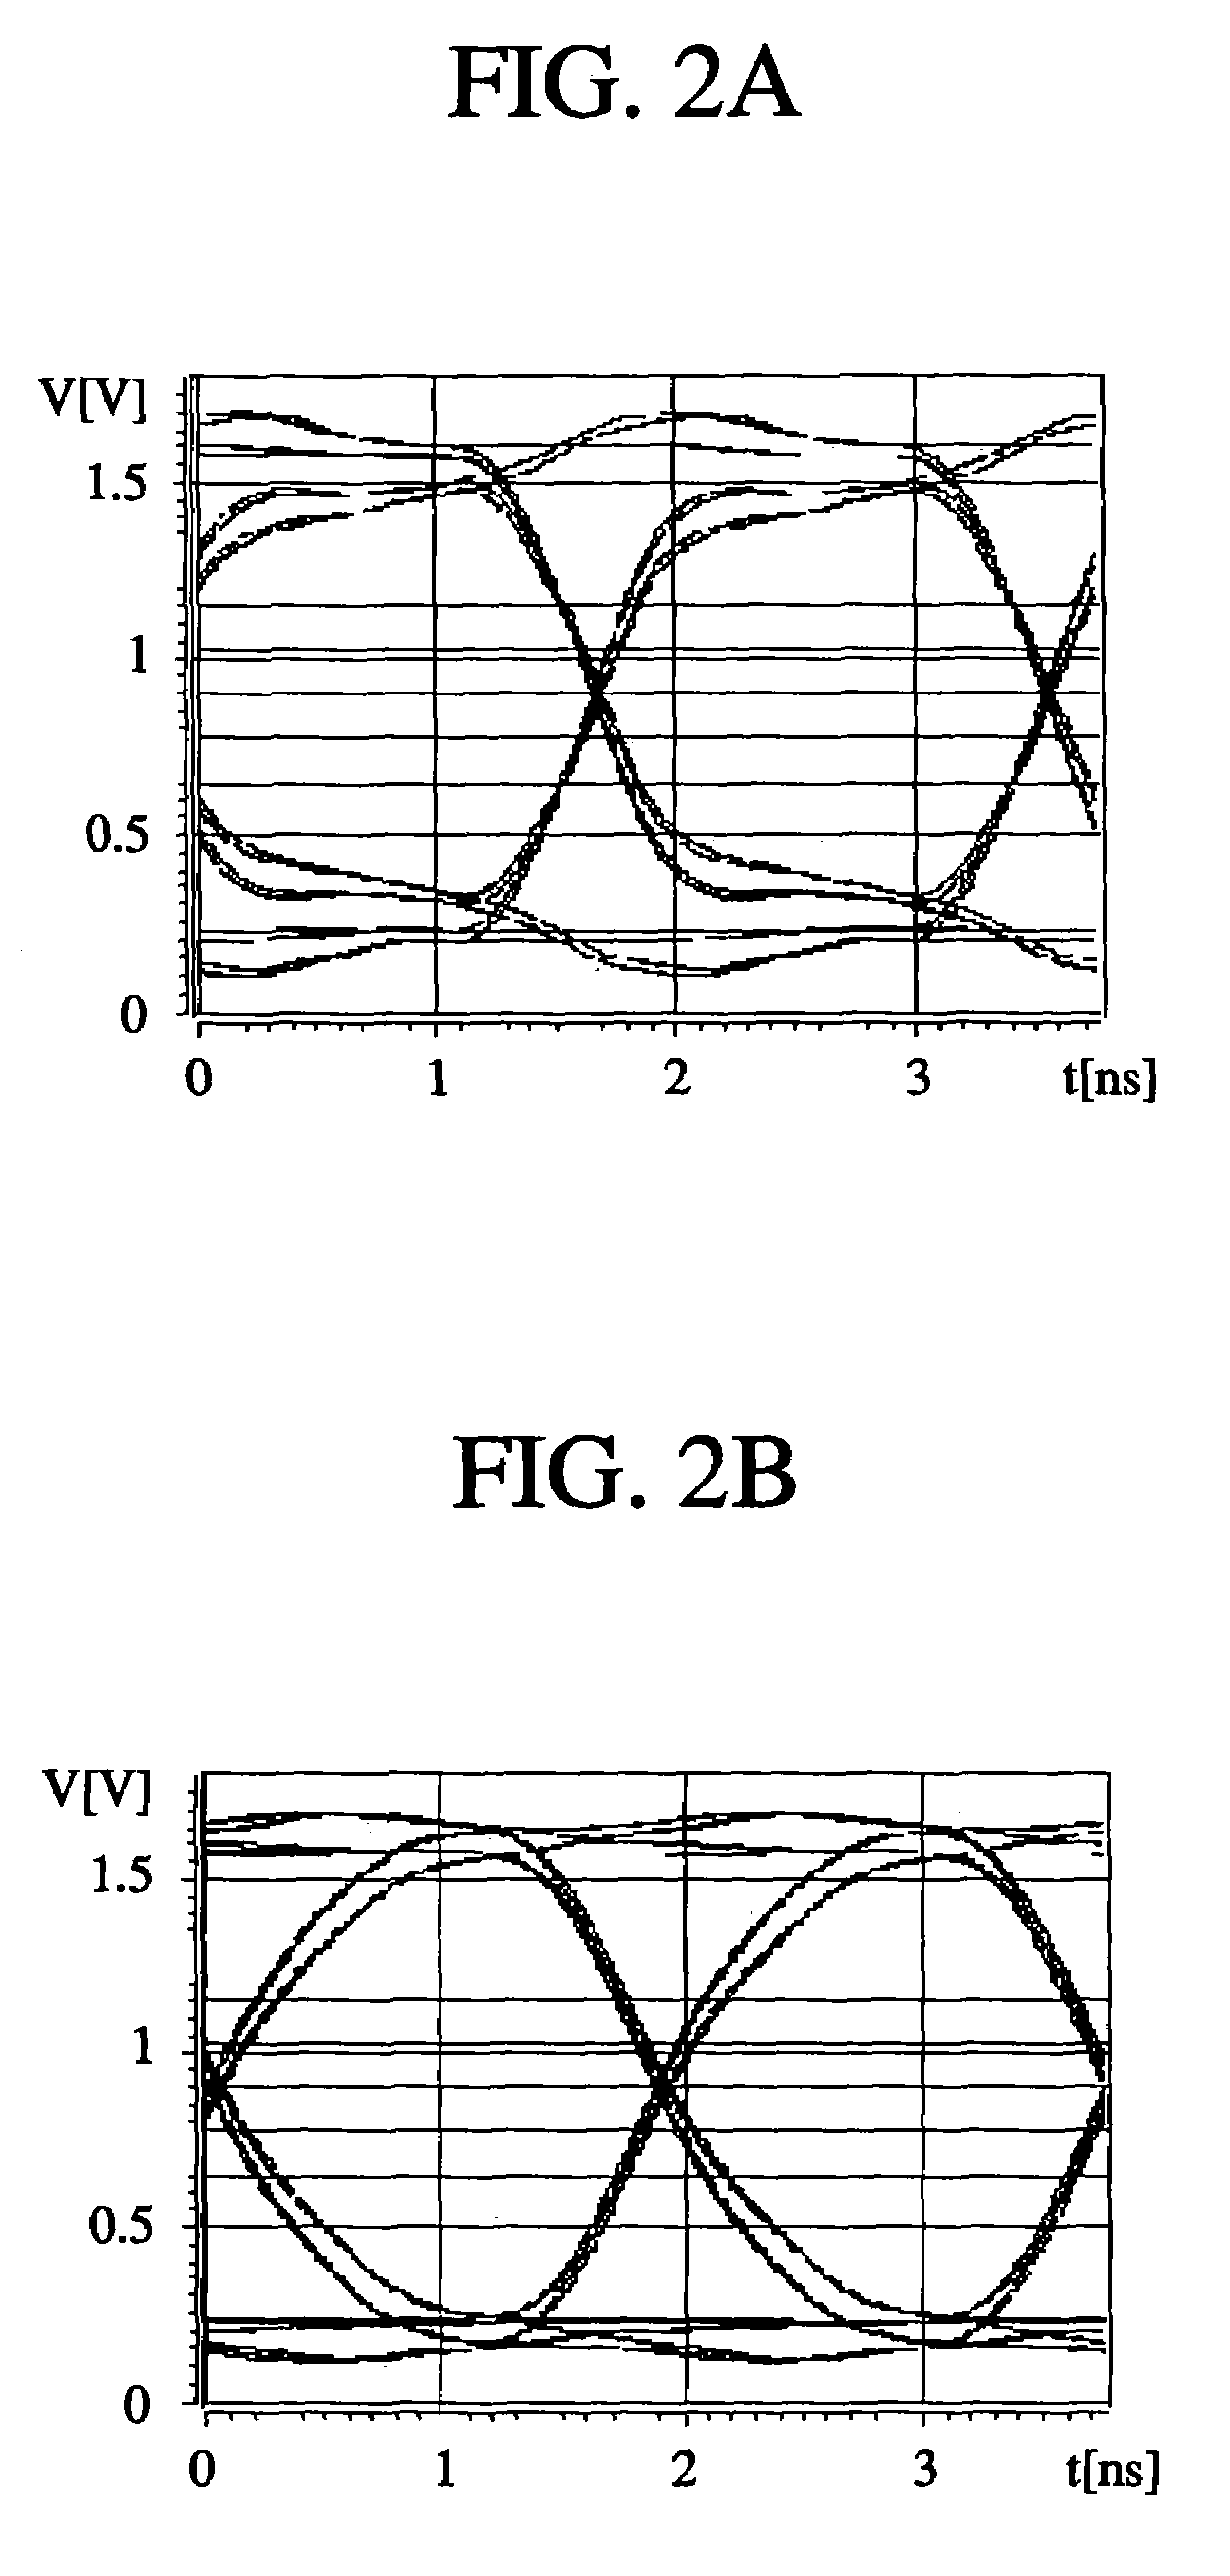 Memory system having memory modules with different memory device loads